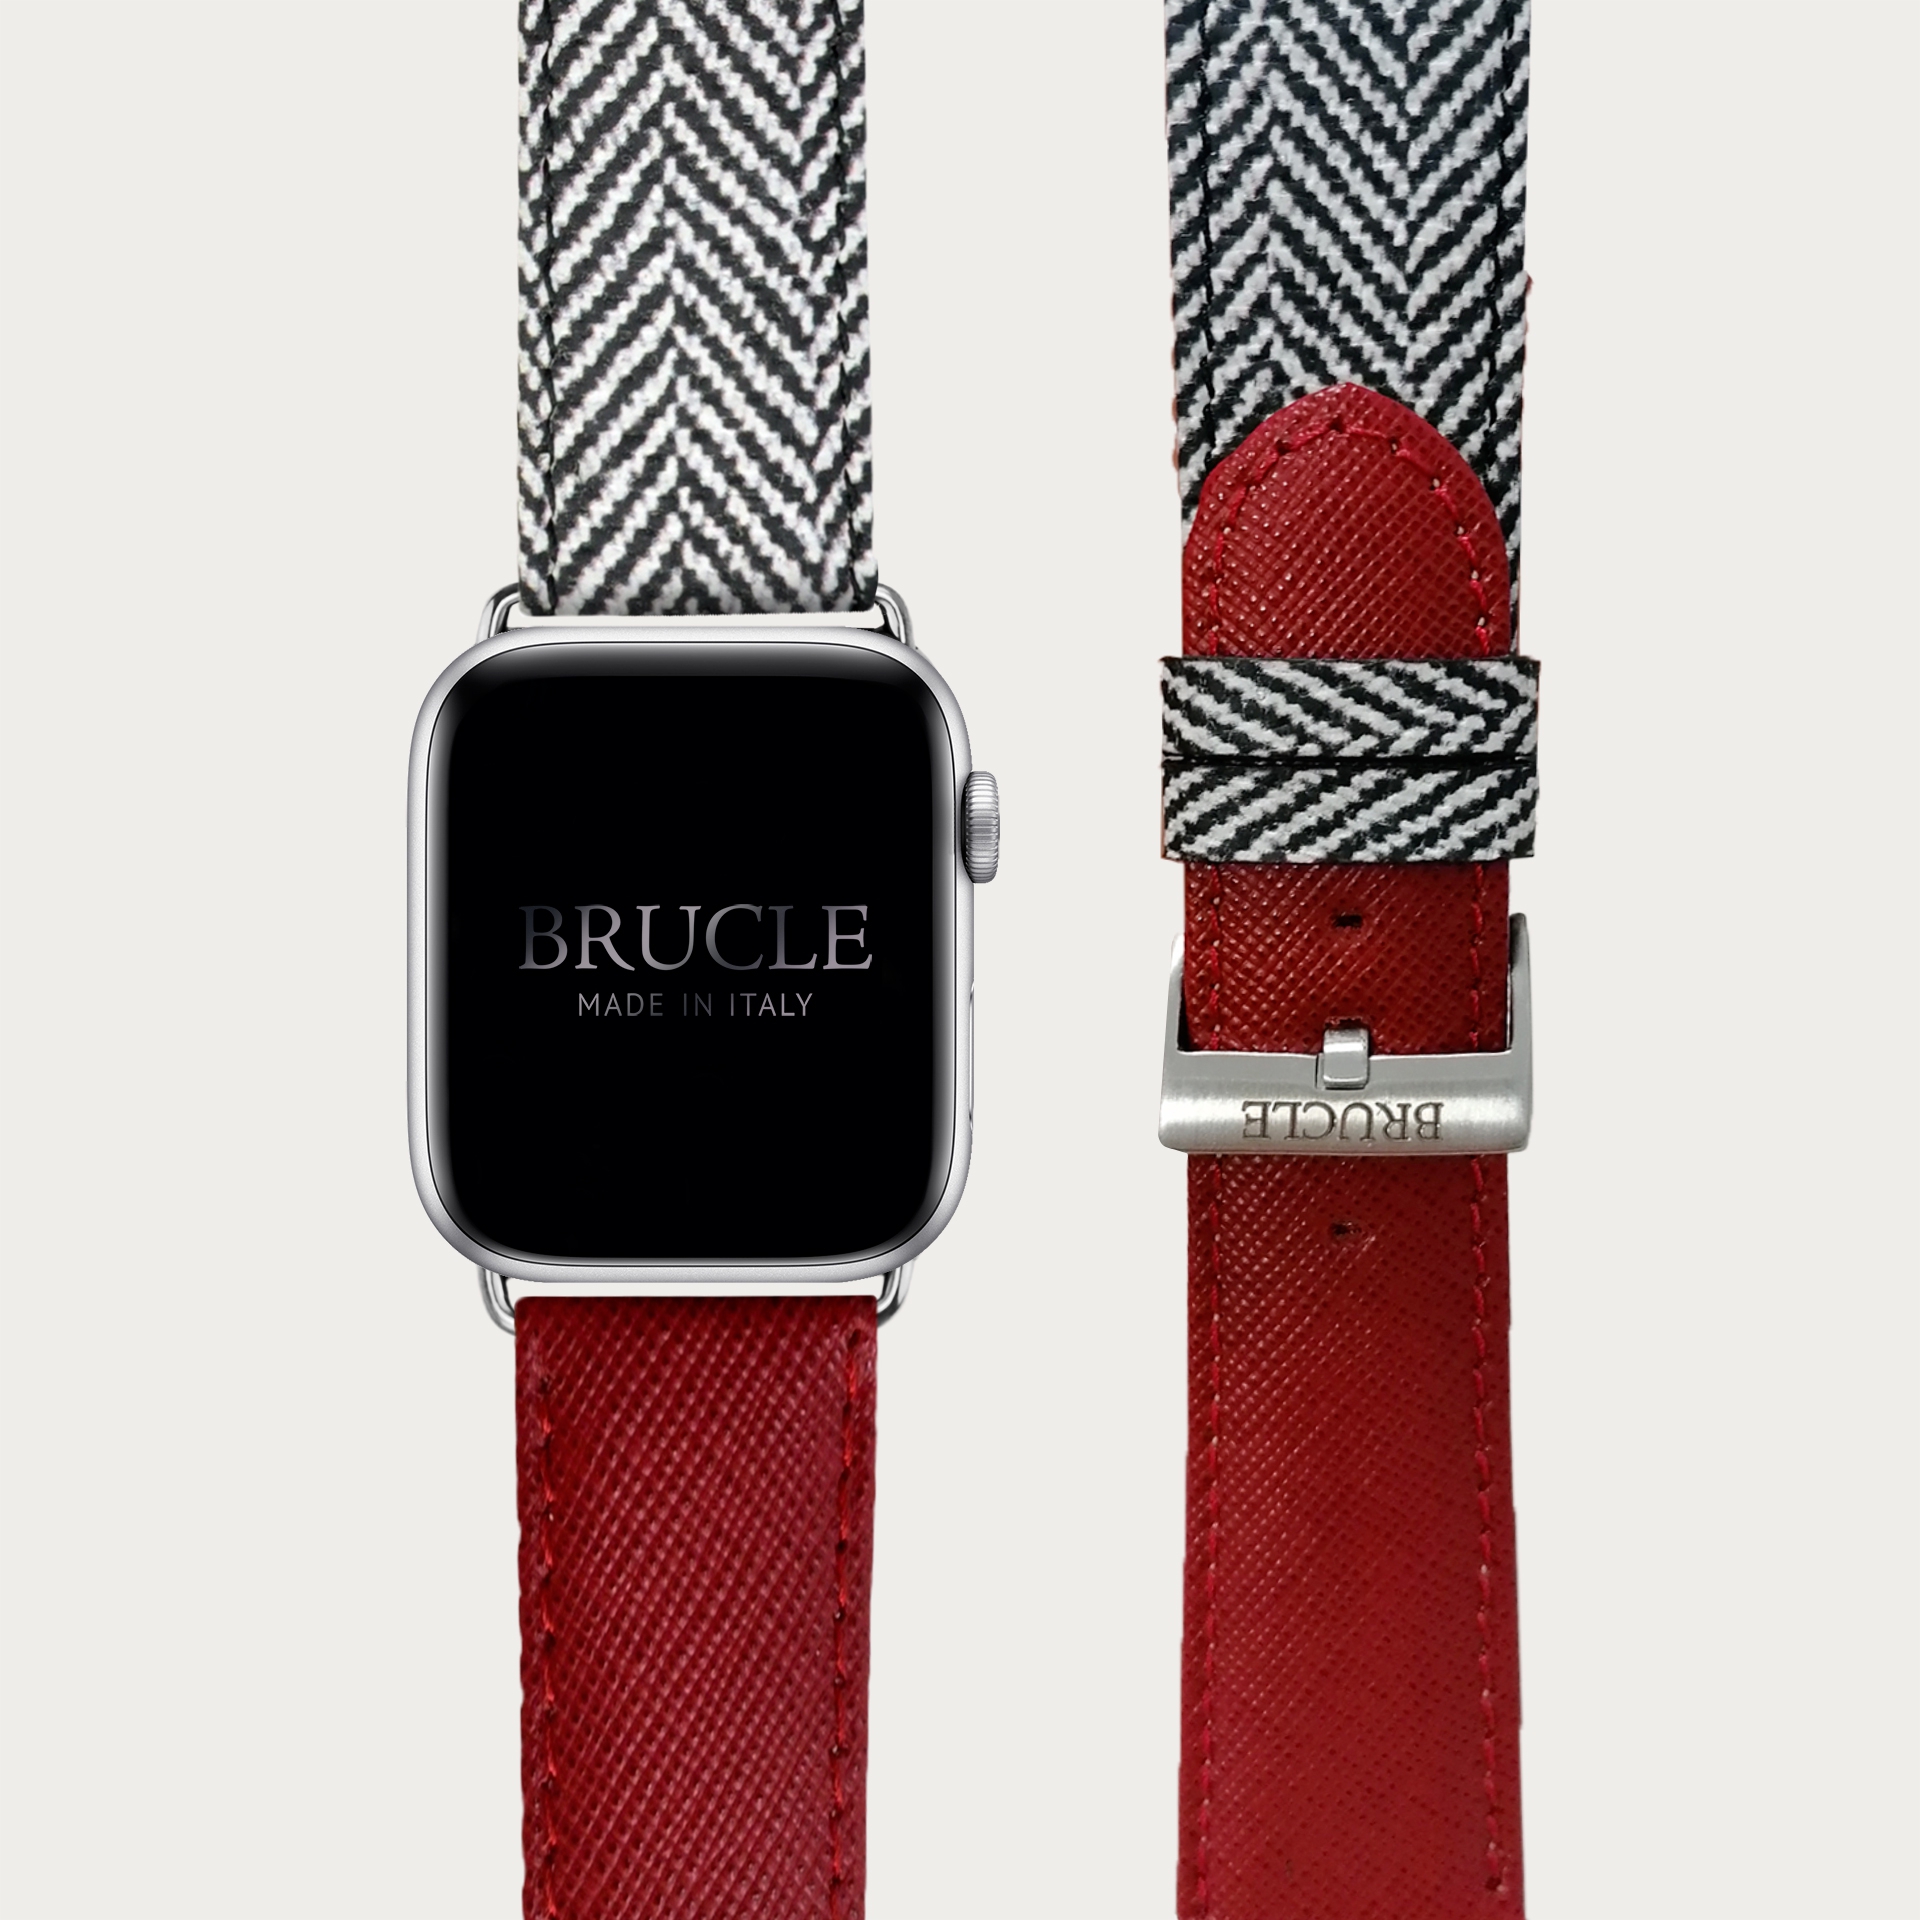 Leather Watch band compatible with Apple Watch / Samsung smartwatch, bicolor red Saffiano print and herringbone pattern